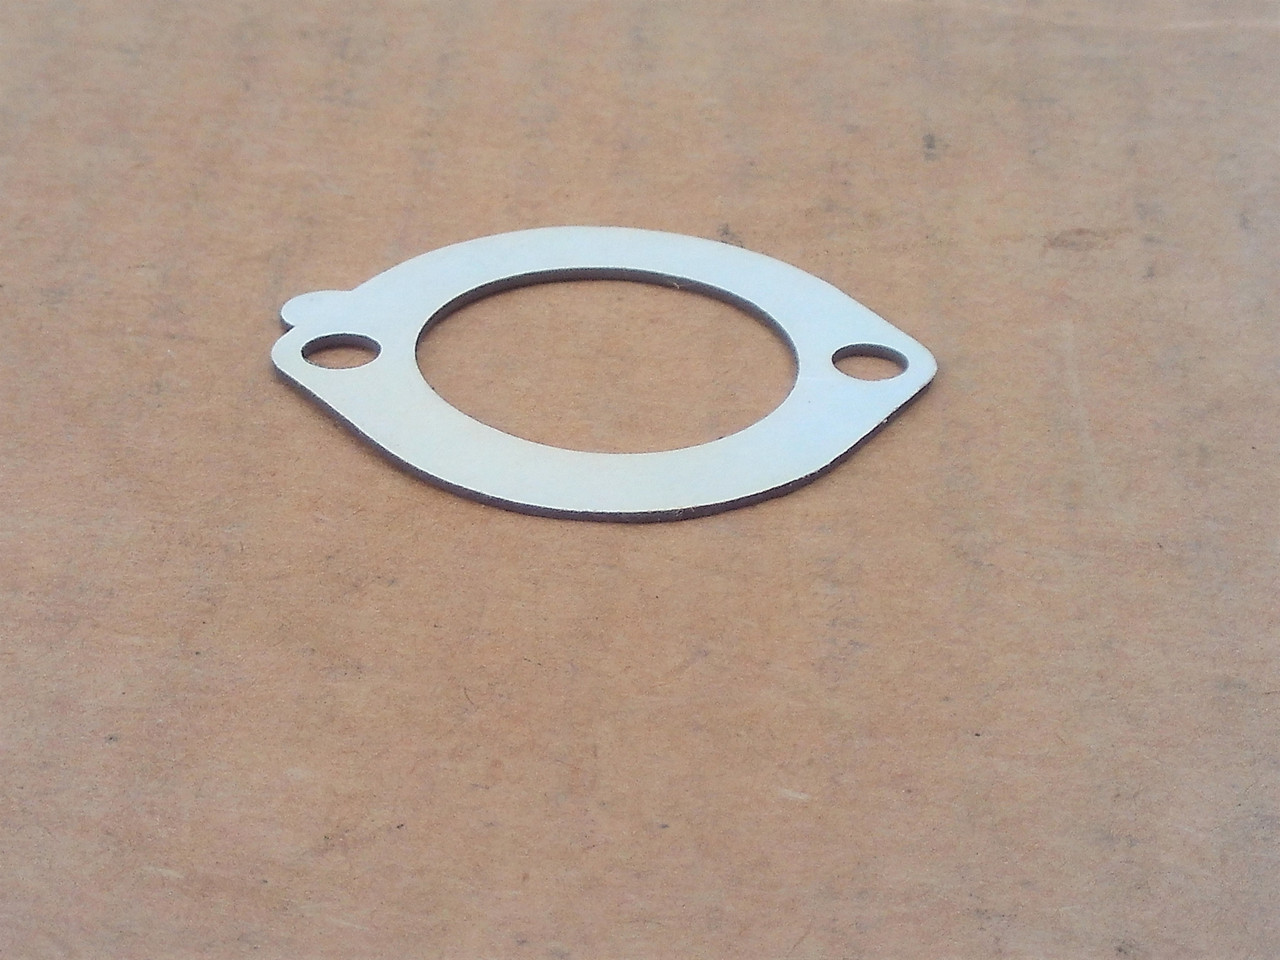 Briggs and Stratton Air Cleaner Gasket 271935 271935S &